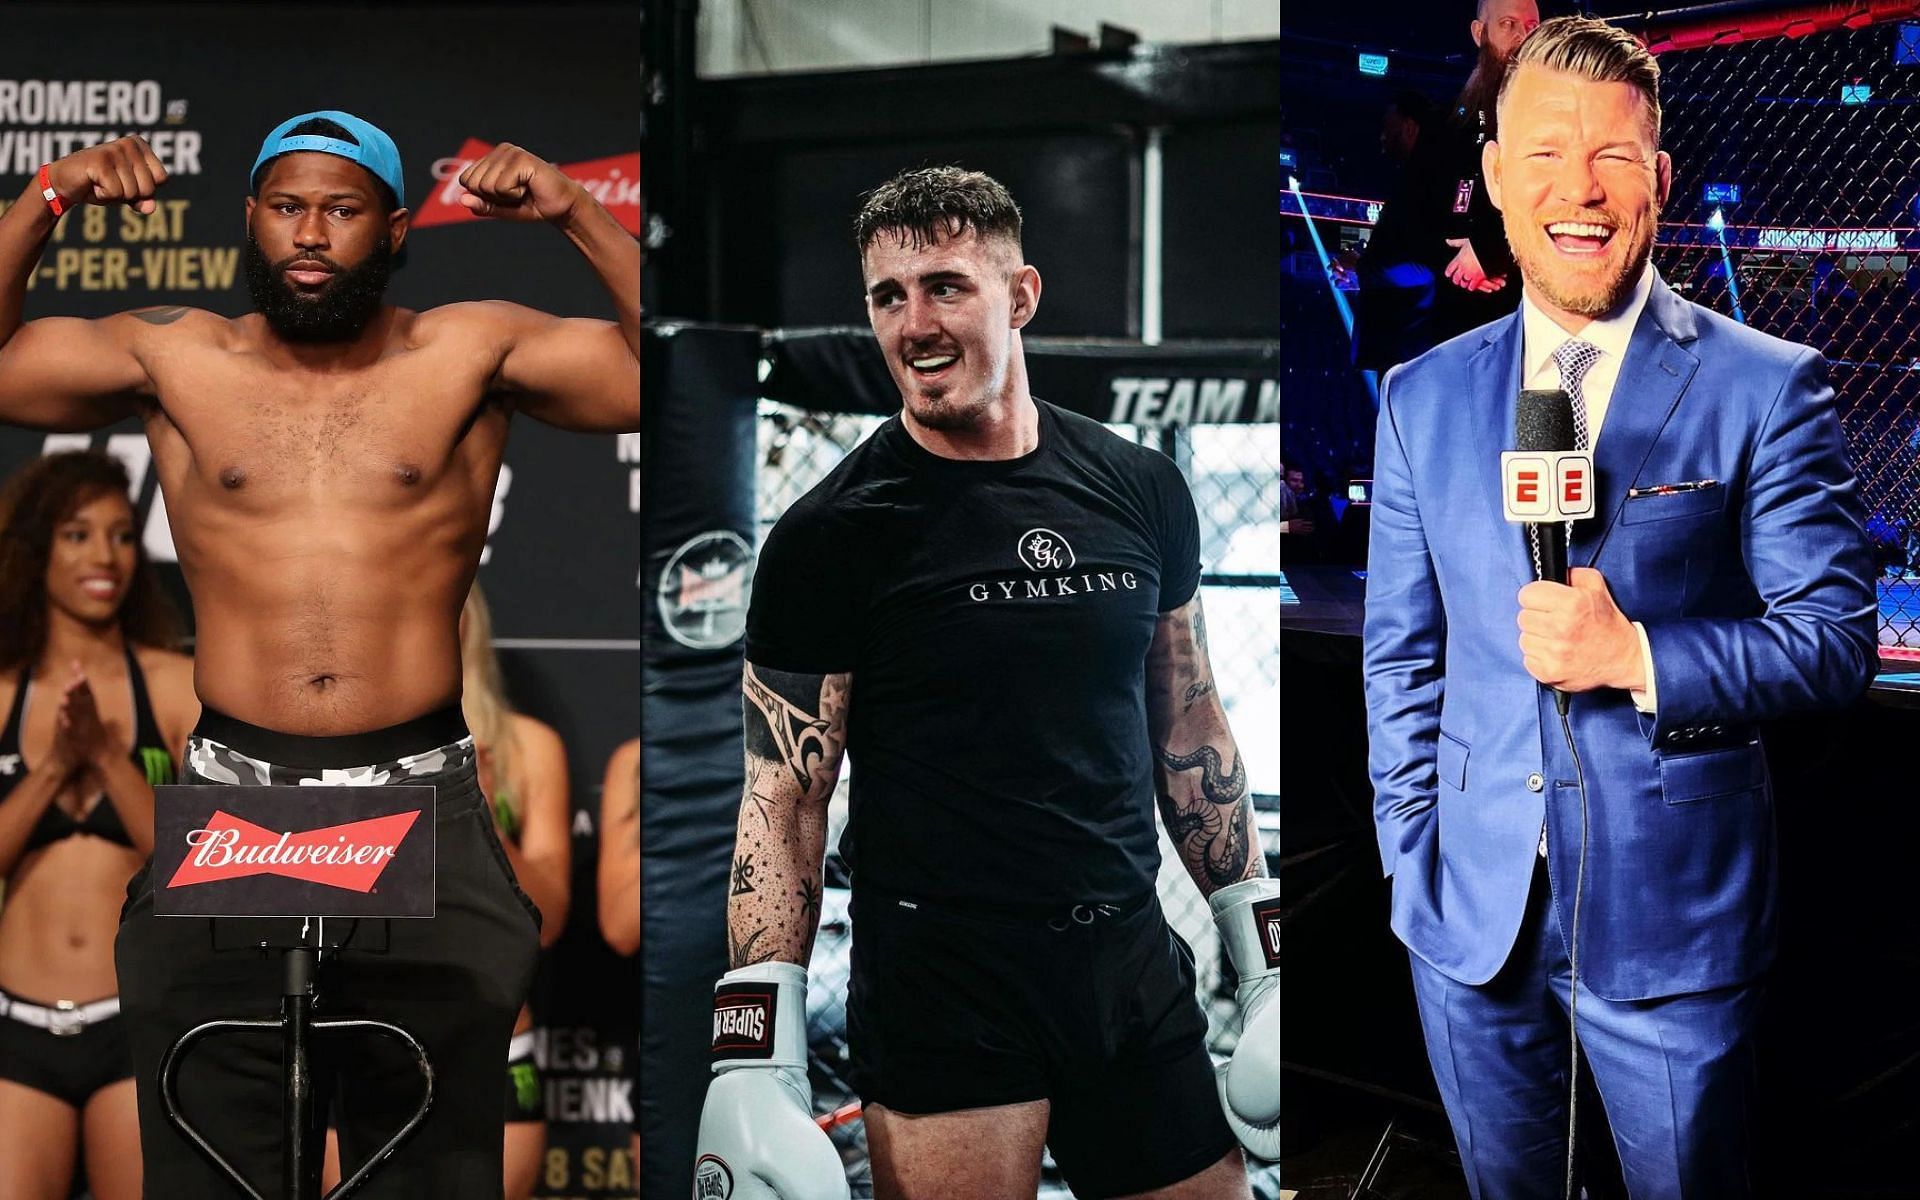 Curtis Blaydes (Left), Tom Aspinall (Middle), and Michael Bisping (Right) (Images courtesy of Getty, @tomaspinallofficial Instagram, and @mikebisping Instagram)